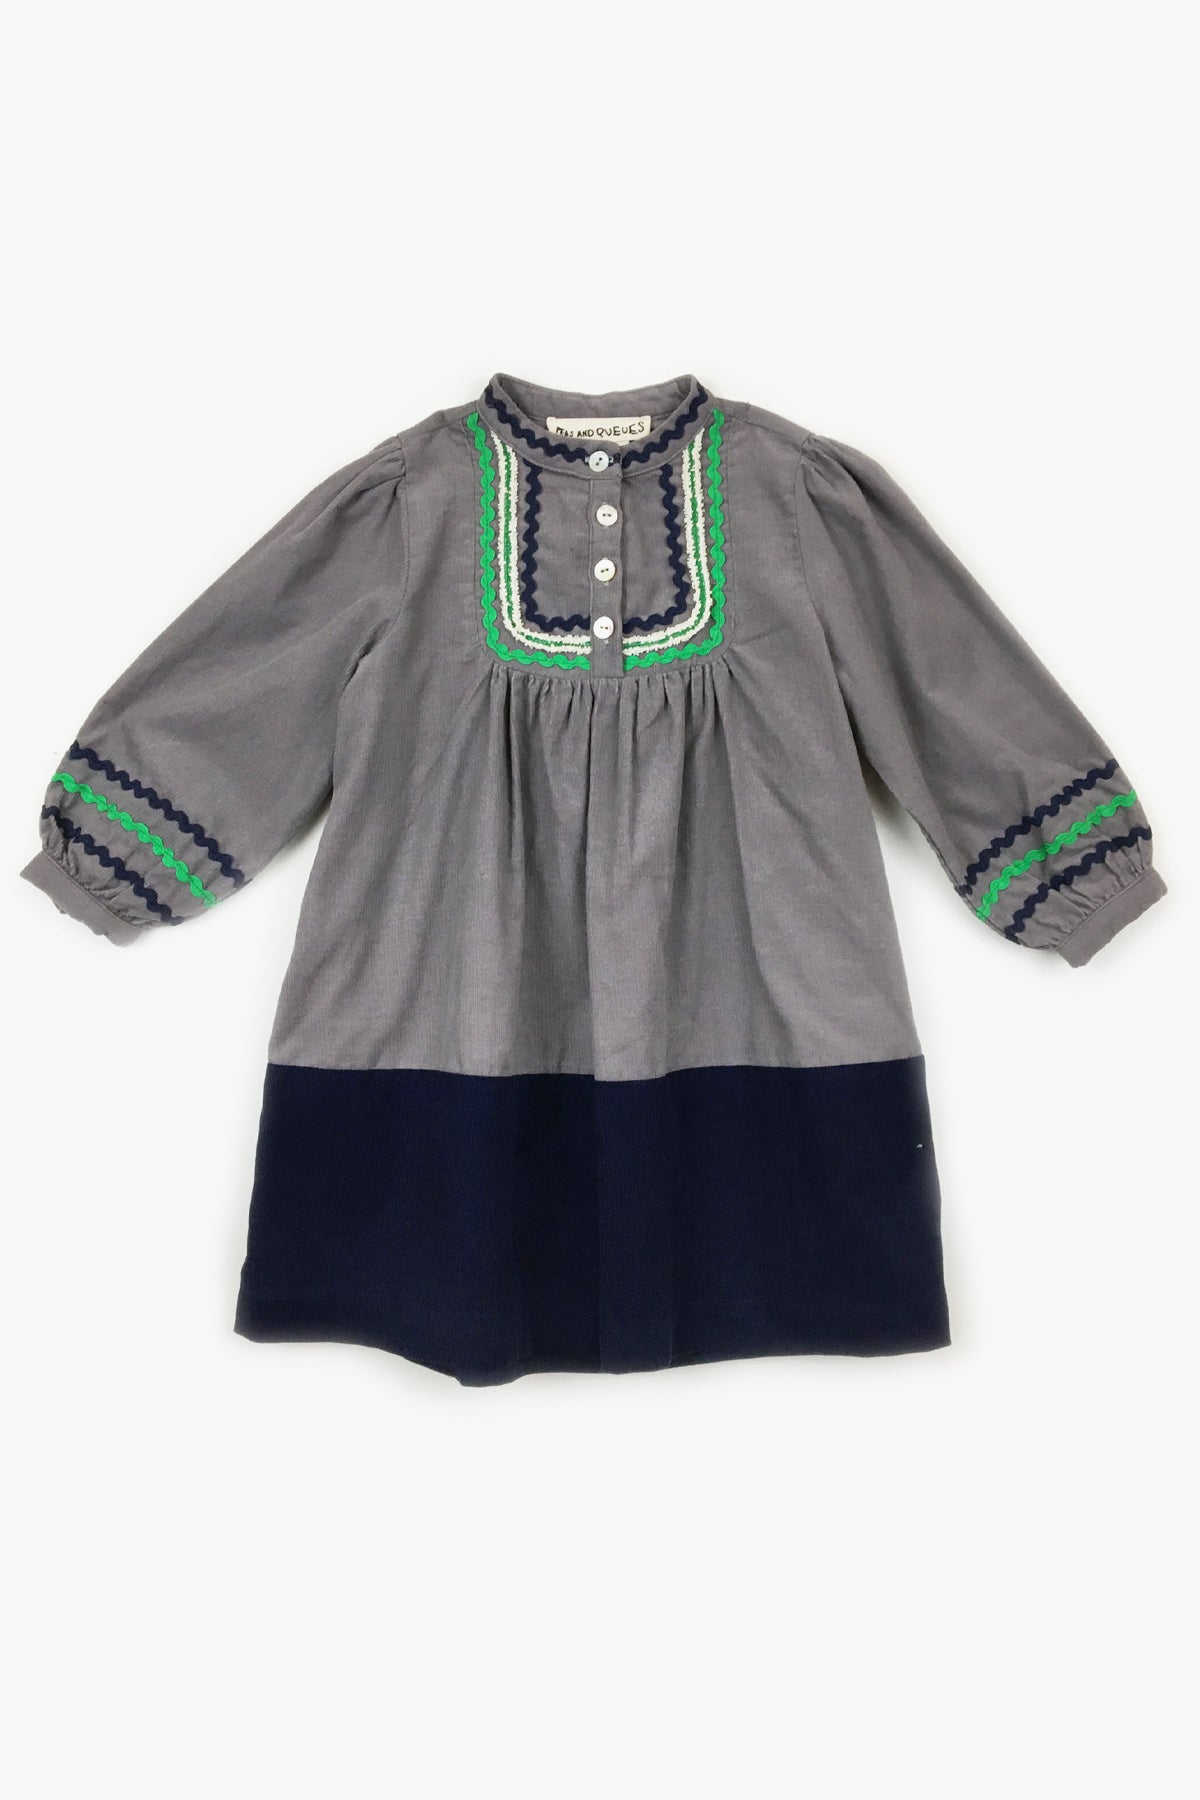 Peas and Queues Sparrow Girls Dress - Grey – Mini Ruby